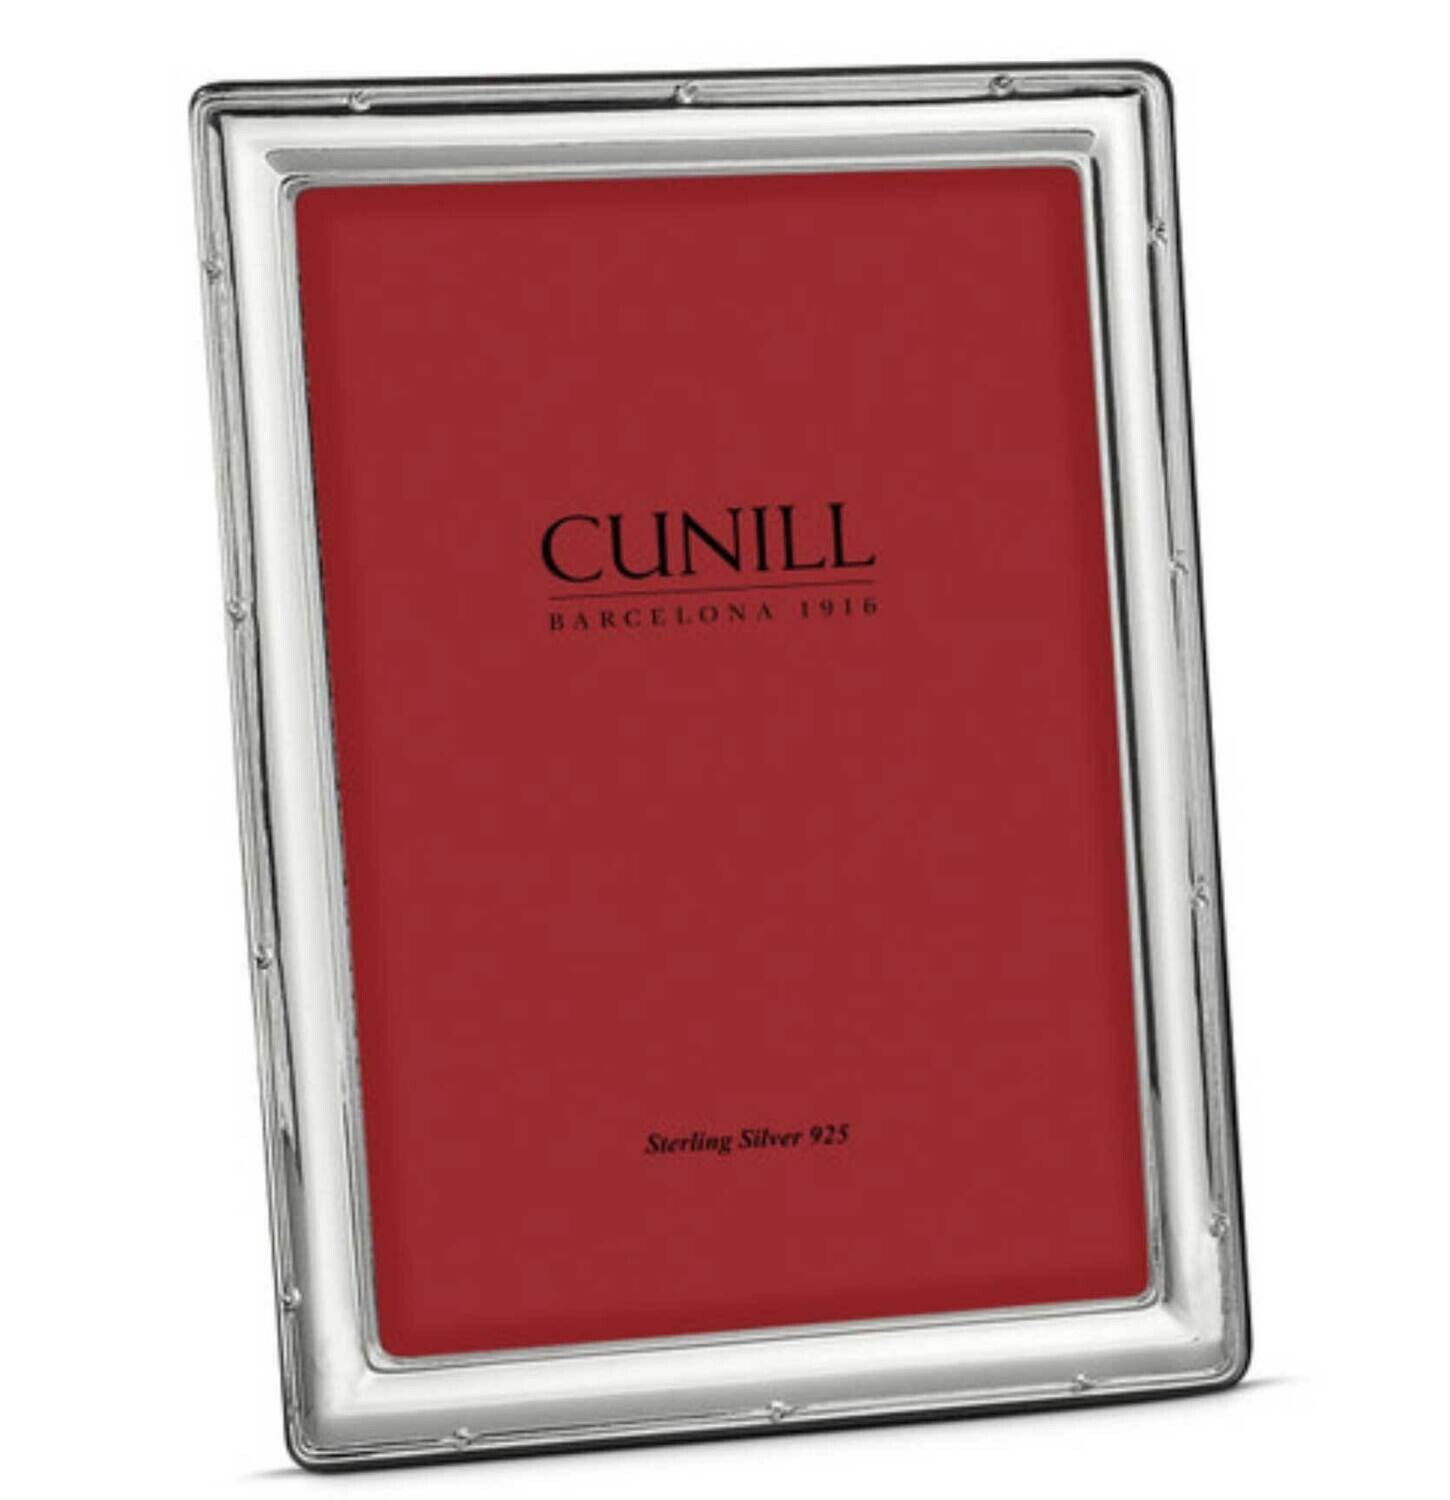 Cunill Narrow Ribbon 5x7 Inch Picture Frame .925 Sterling Silver 80257